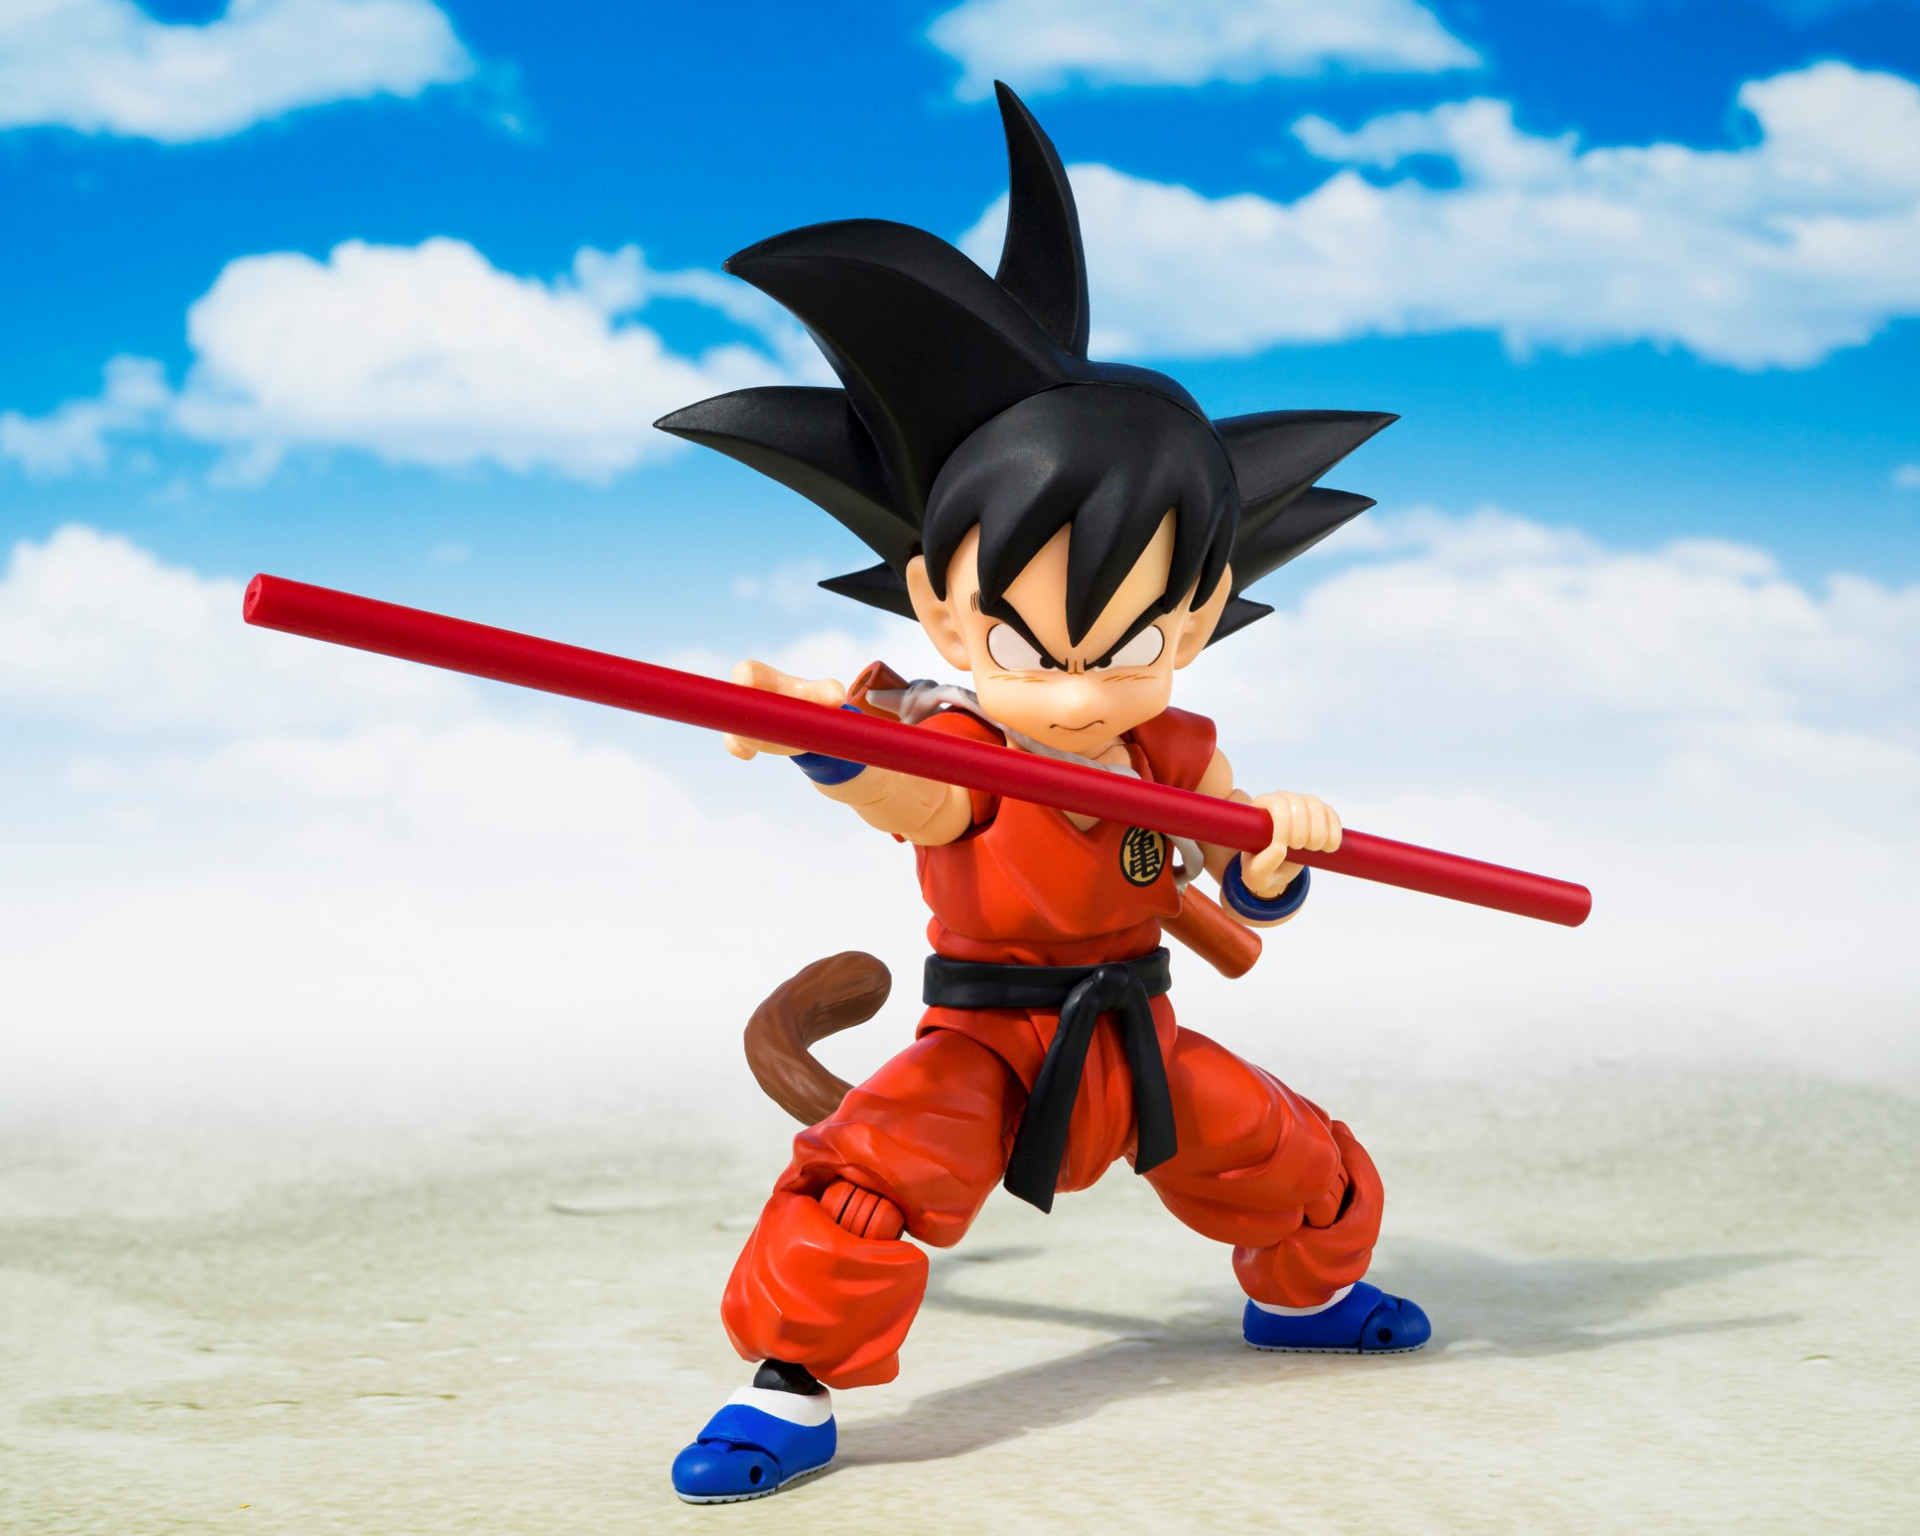 [Special TAMASHII NATIONS STORE-Exclusive Goku Figure Joins the S.H